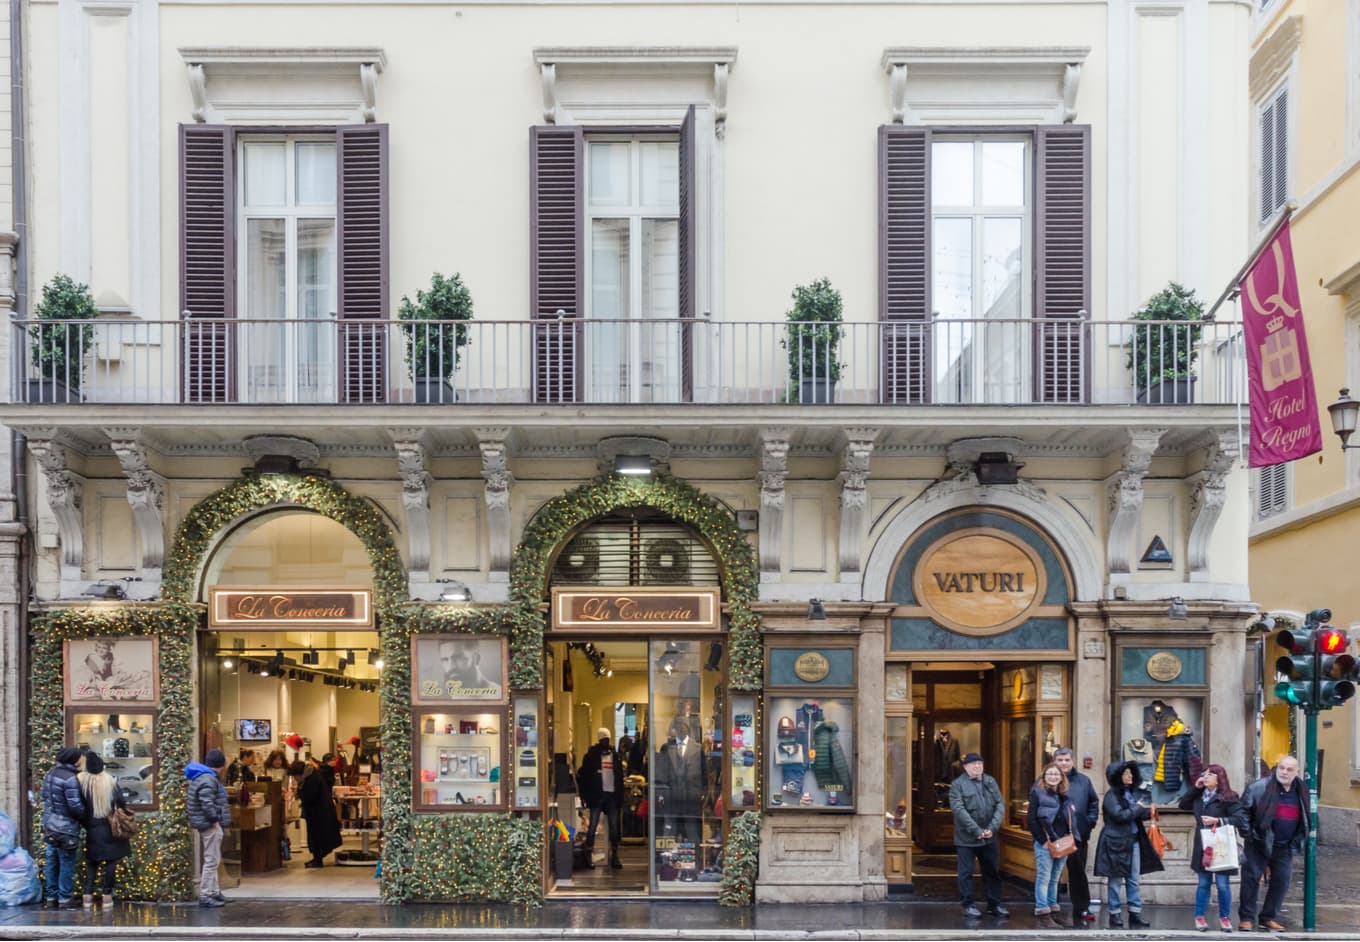 Fendi is one of the best places to shop in Rome